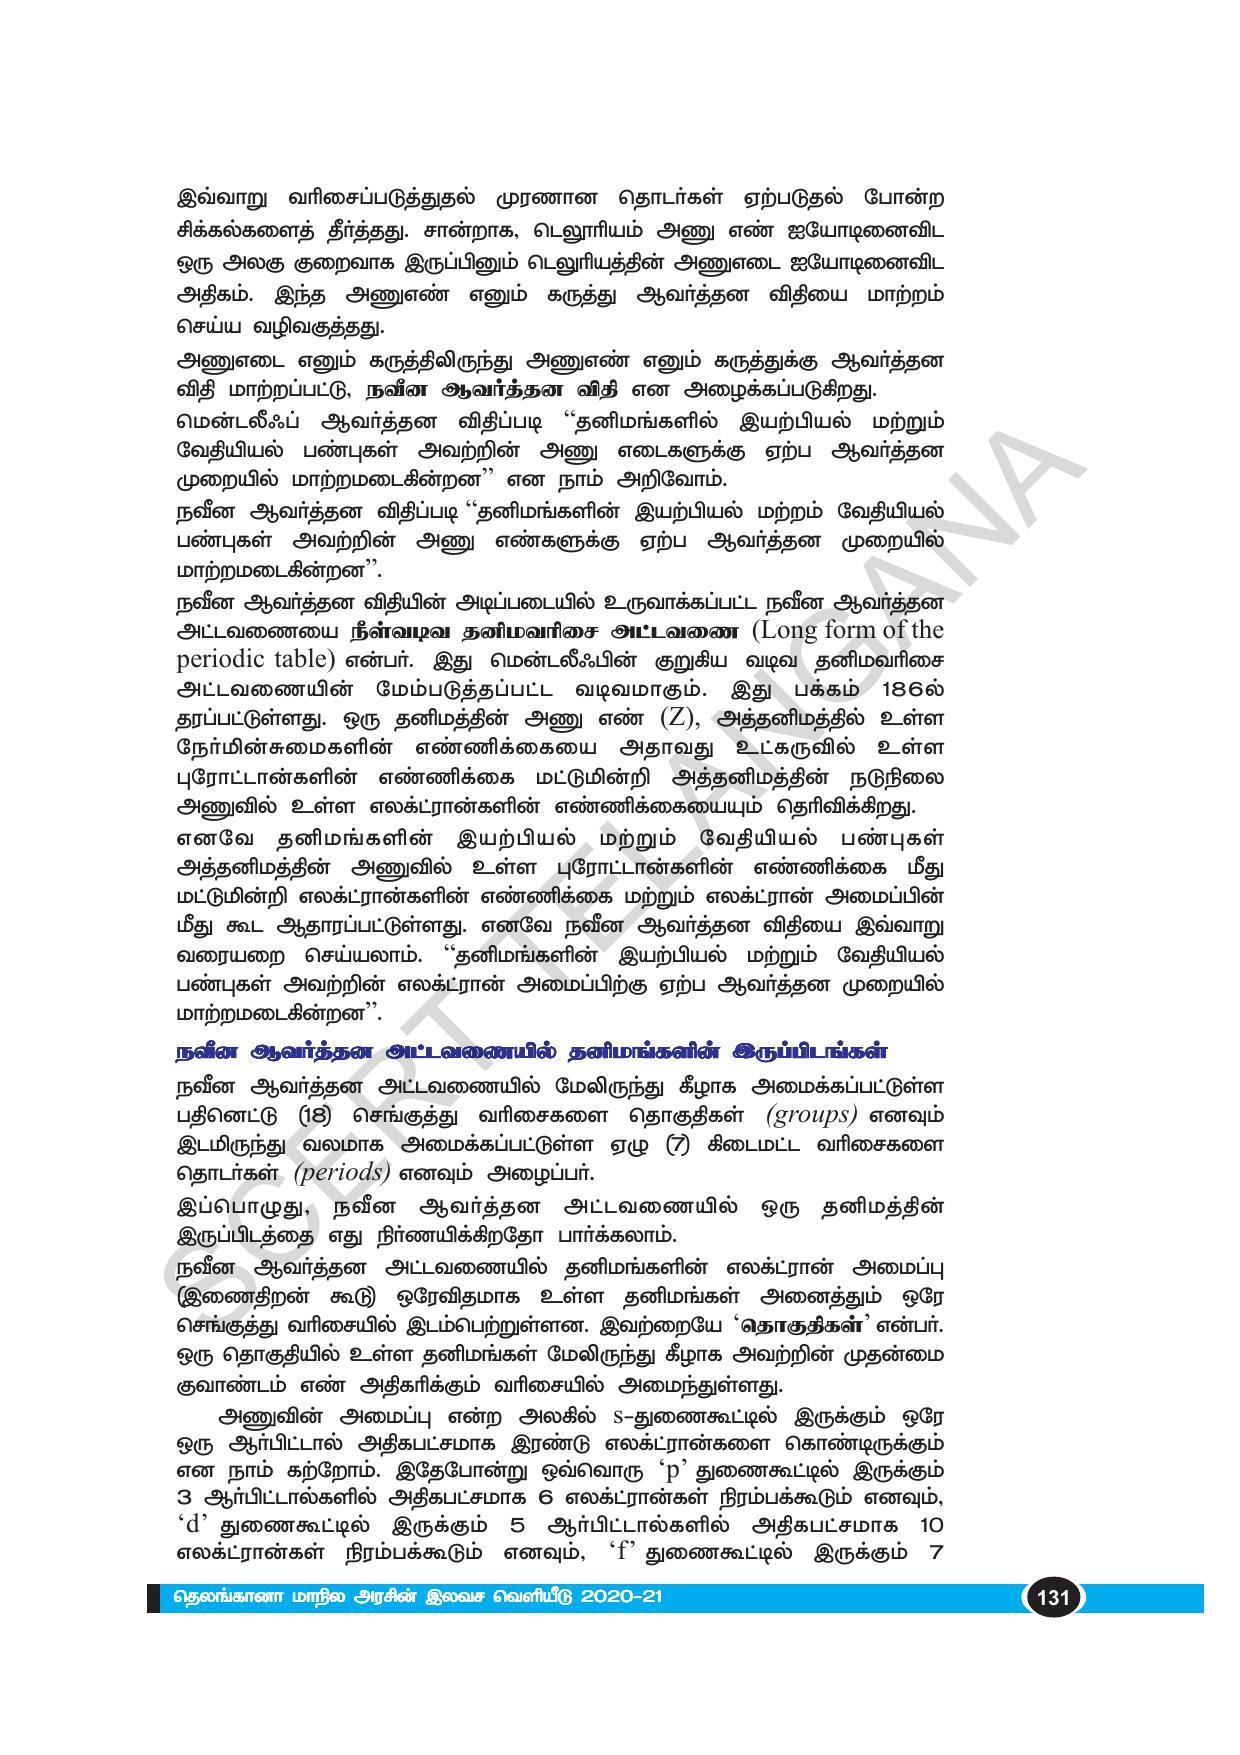 TS SCERT Class 10 Physical Science(Tamil Medium) Text Book - Page 143